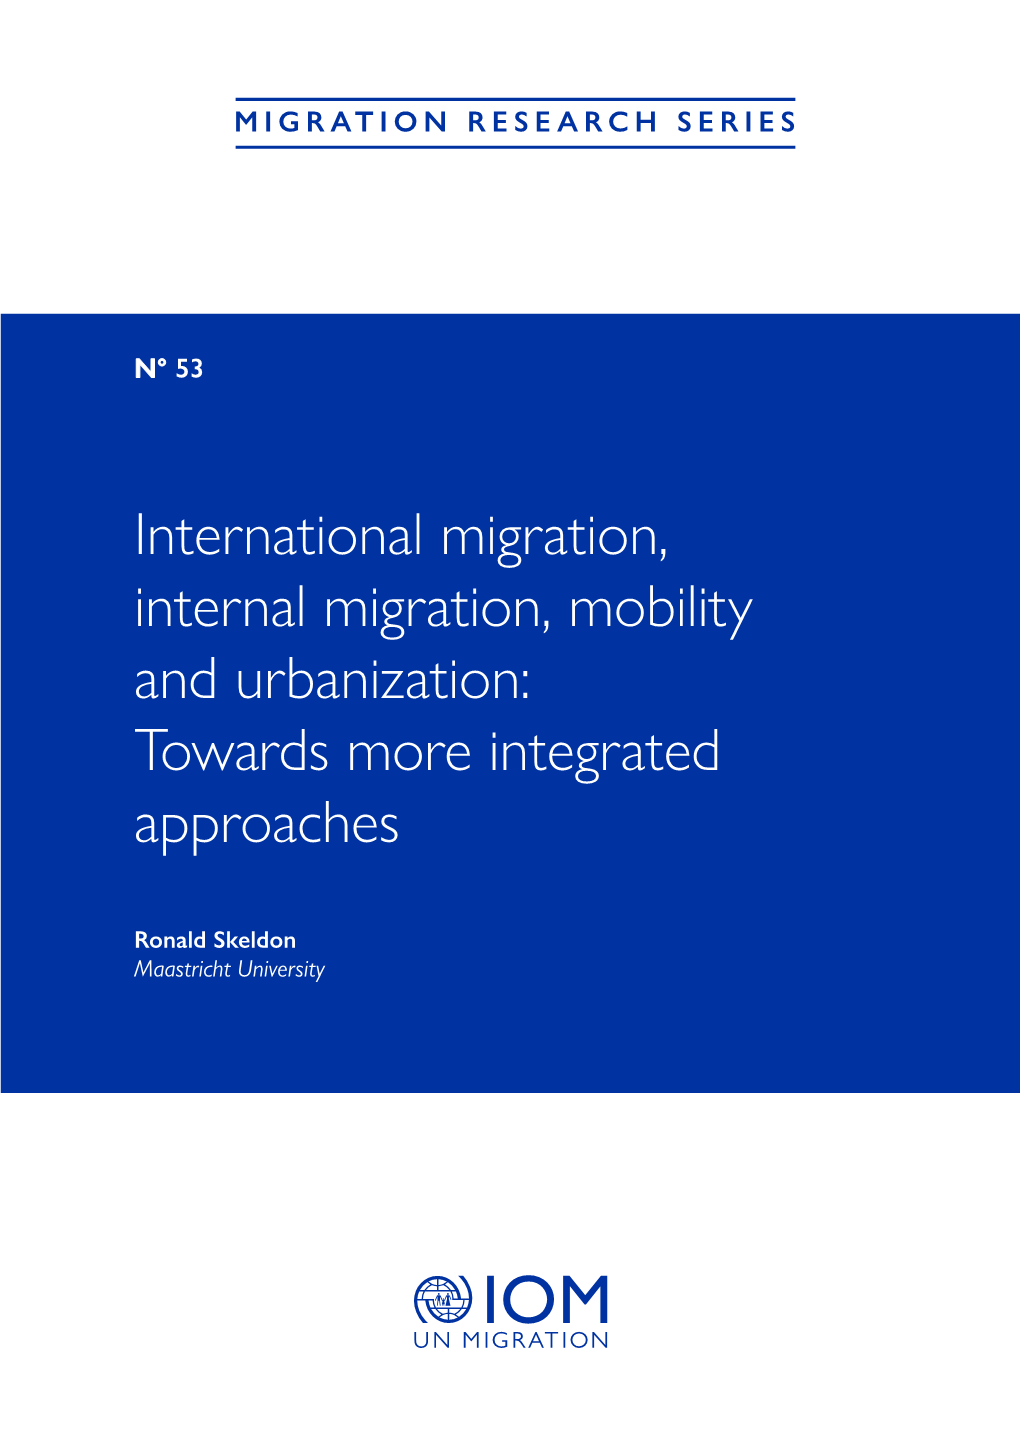 International Migration, Internal Migration, Mobility and Urbanization: Towards More Integrated Approaches